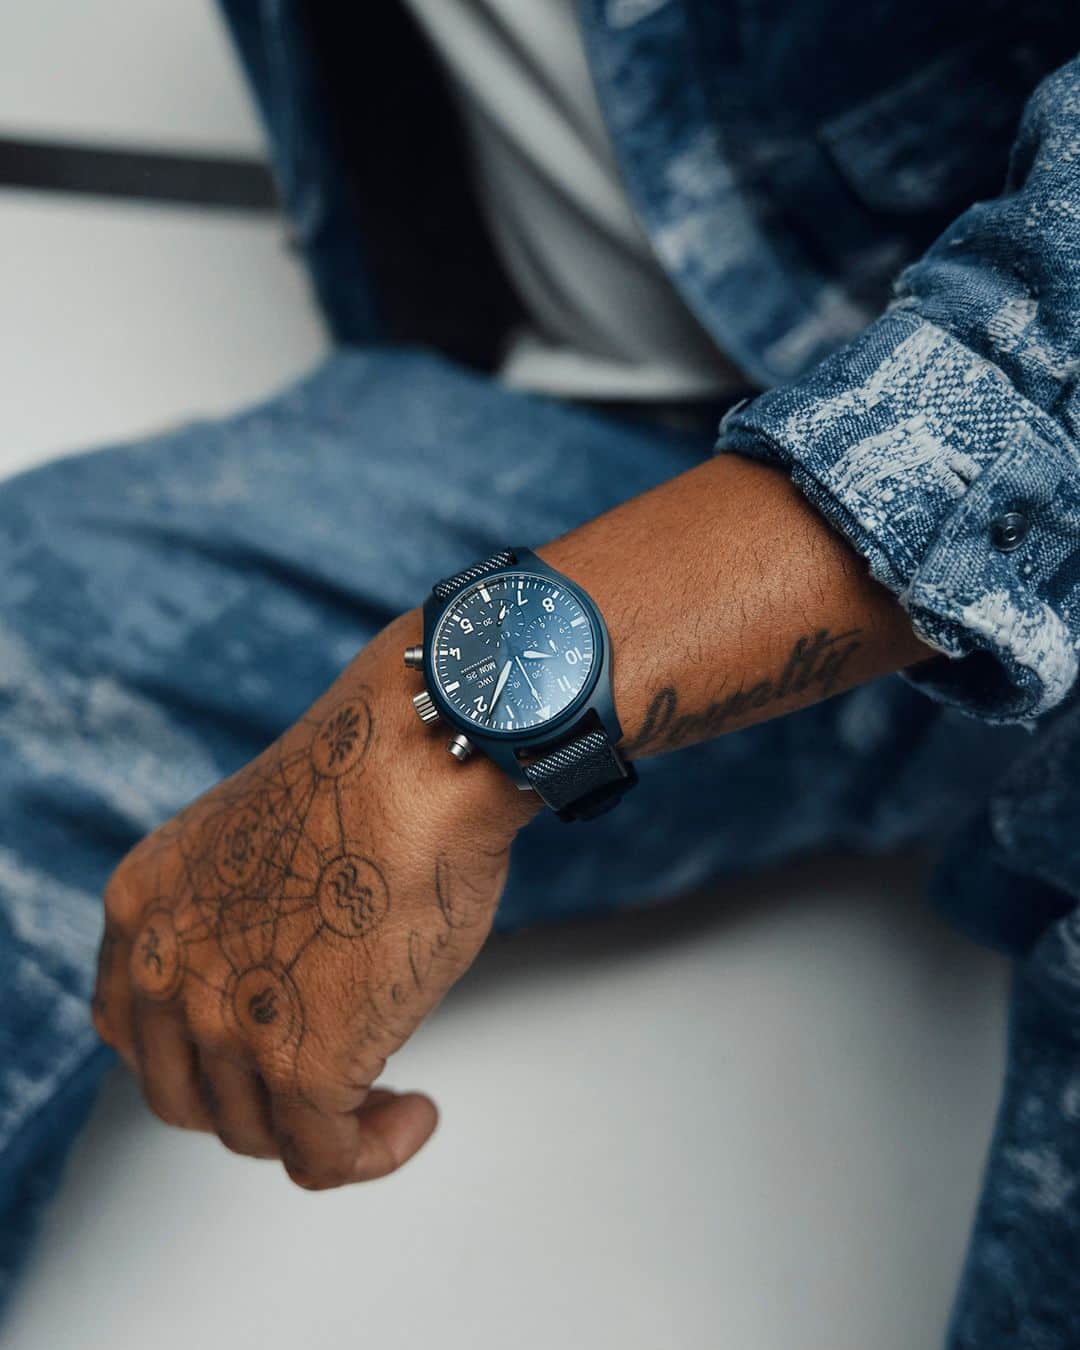 IWCのインスタグラム：「Born from a powerful creative gesture, our Pilot's Watch Chronograph 41 Top Gun Oceana sits on the wrist of @lewishamilton. This new Oceana-colored timepiece features a matching blue rubber strap with a denim finish textile inlay.  📸 Ref. IW389404  #IWCpilot | #TheReference | #IWCtopgun | #IWCoceana | #LewisHamilton」